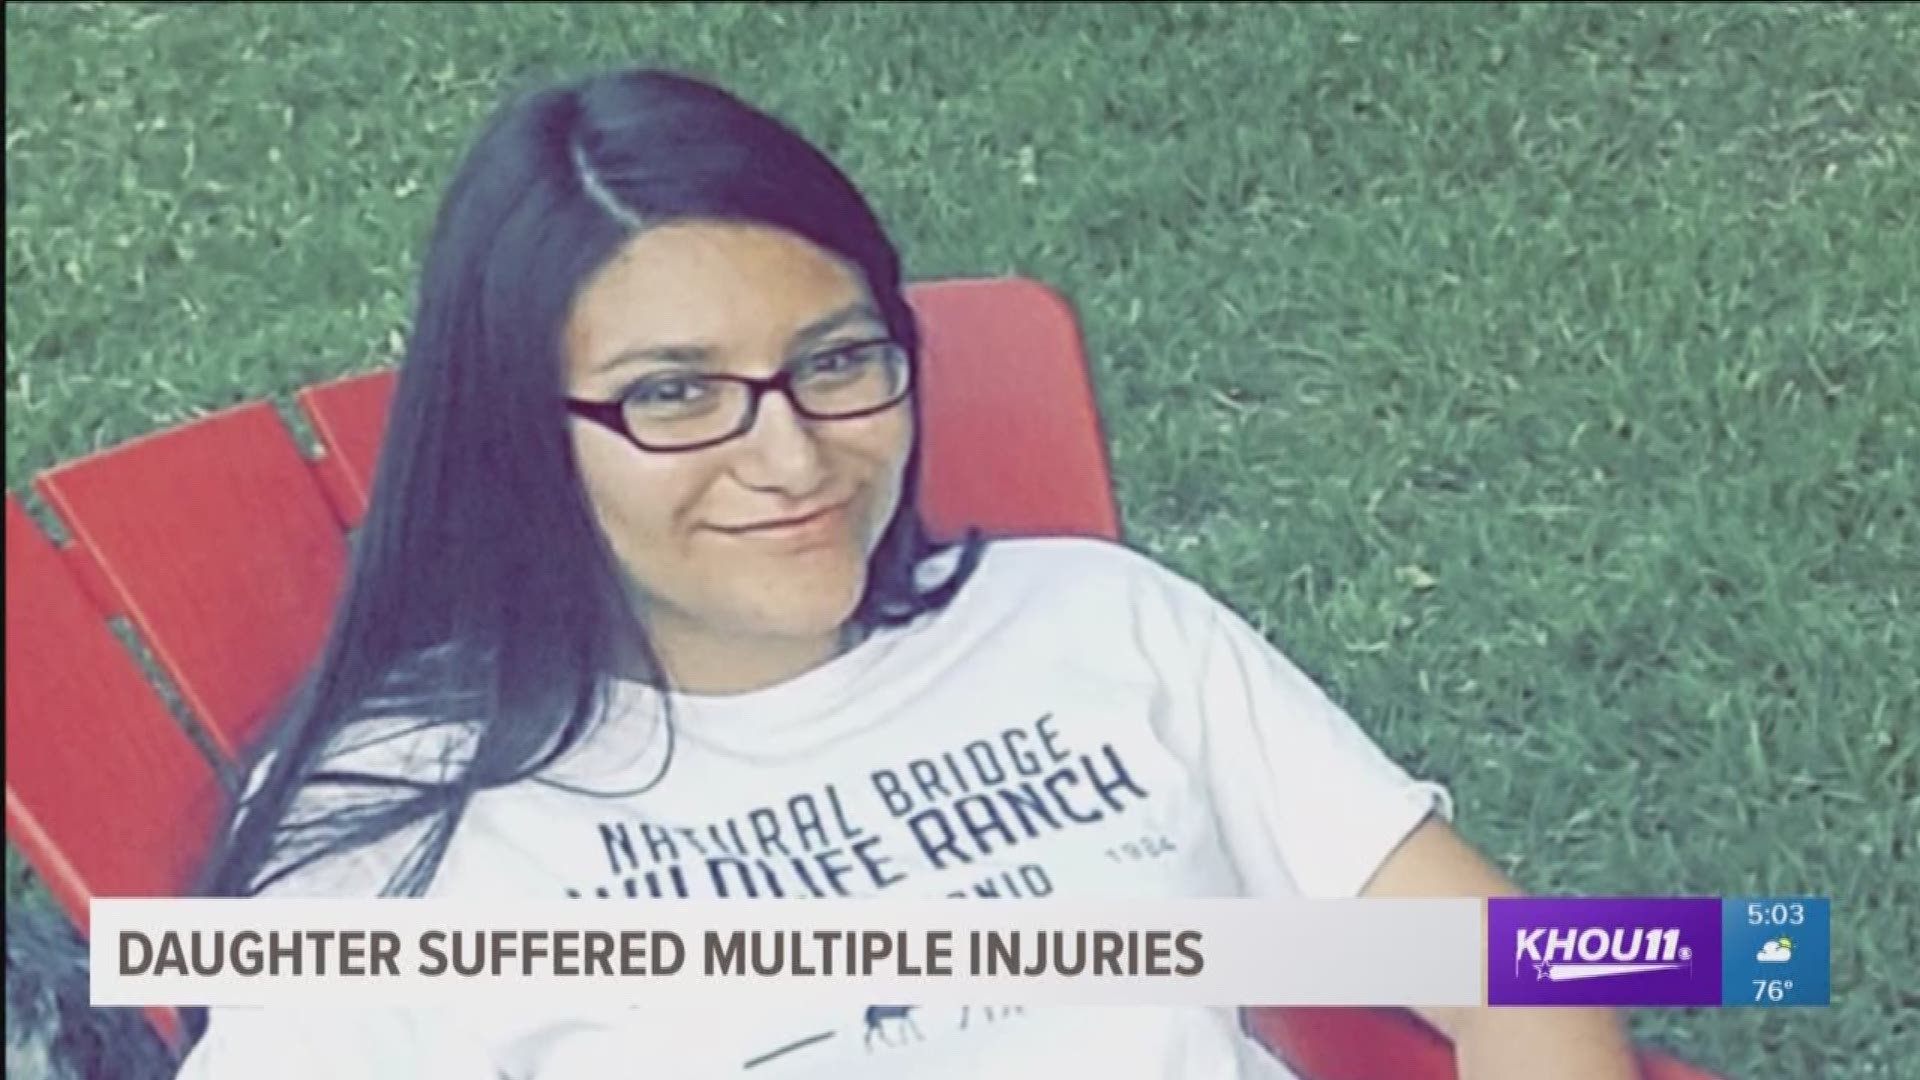 Sarah Salazar was in an art class when the shooting happened. The honor roll student with dreams of being a doctor is now being treated by a team of them after suffering three shotgun wounds.